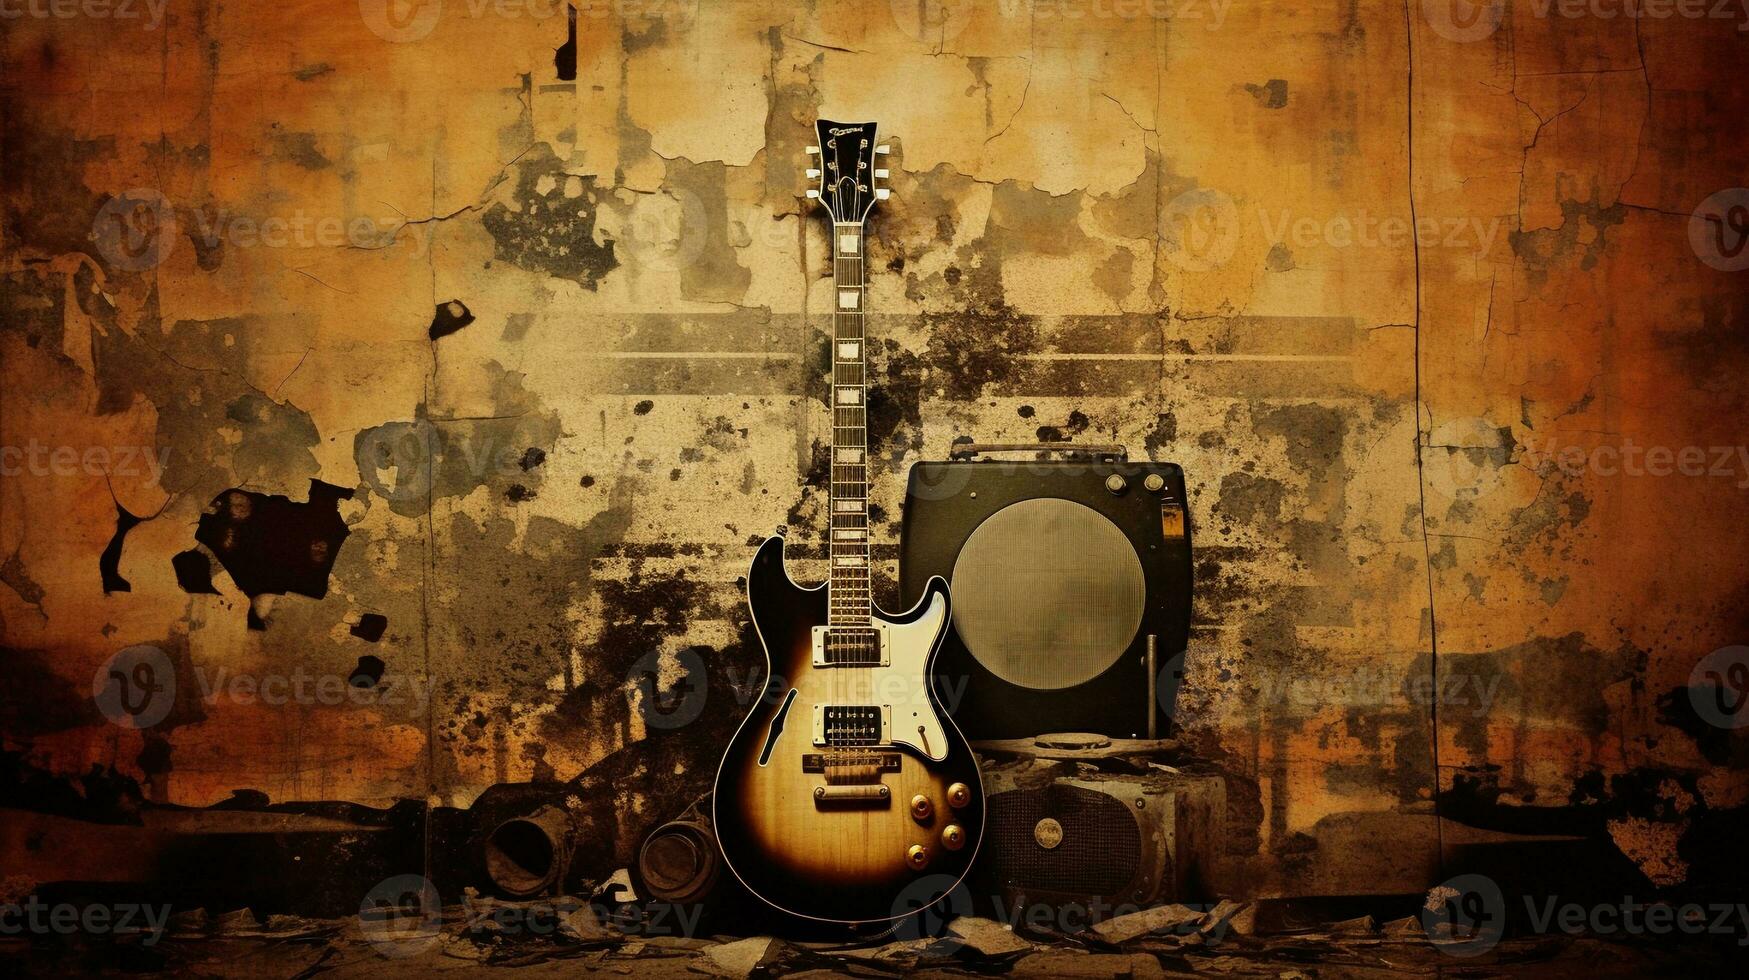 An image capturing the essence of grunge music with distressed textures, vintage equipment, or vinyl records, allowing space for text, background image, AI generated photo